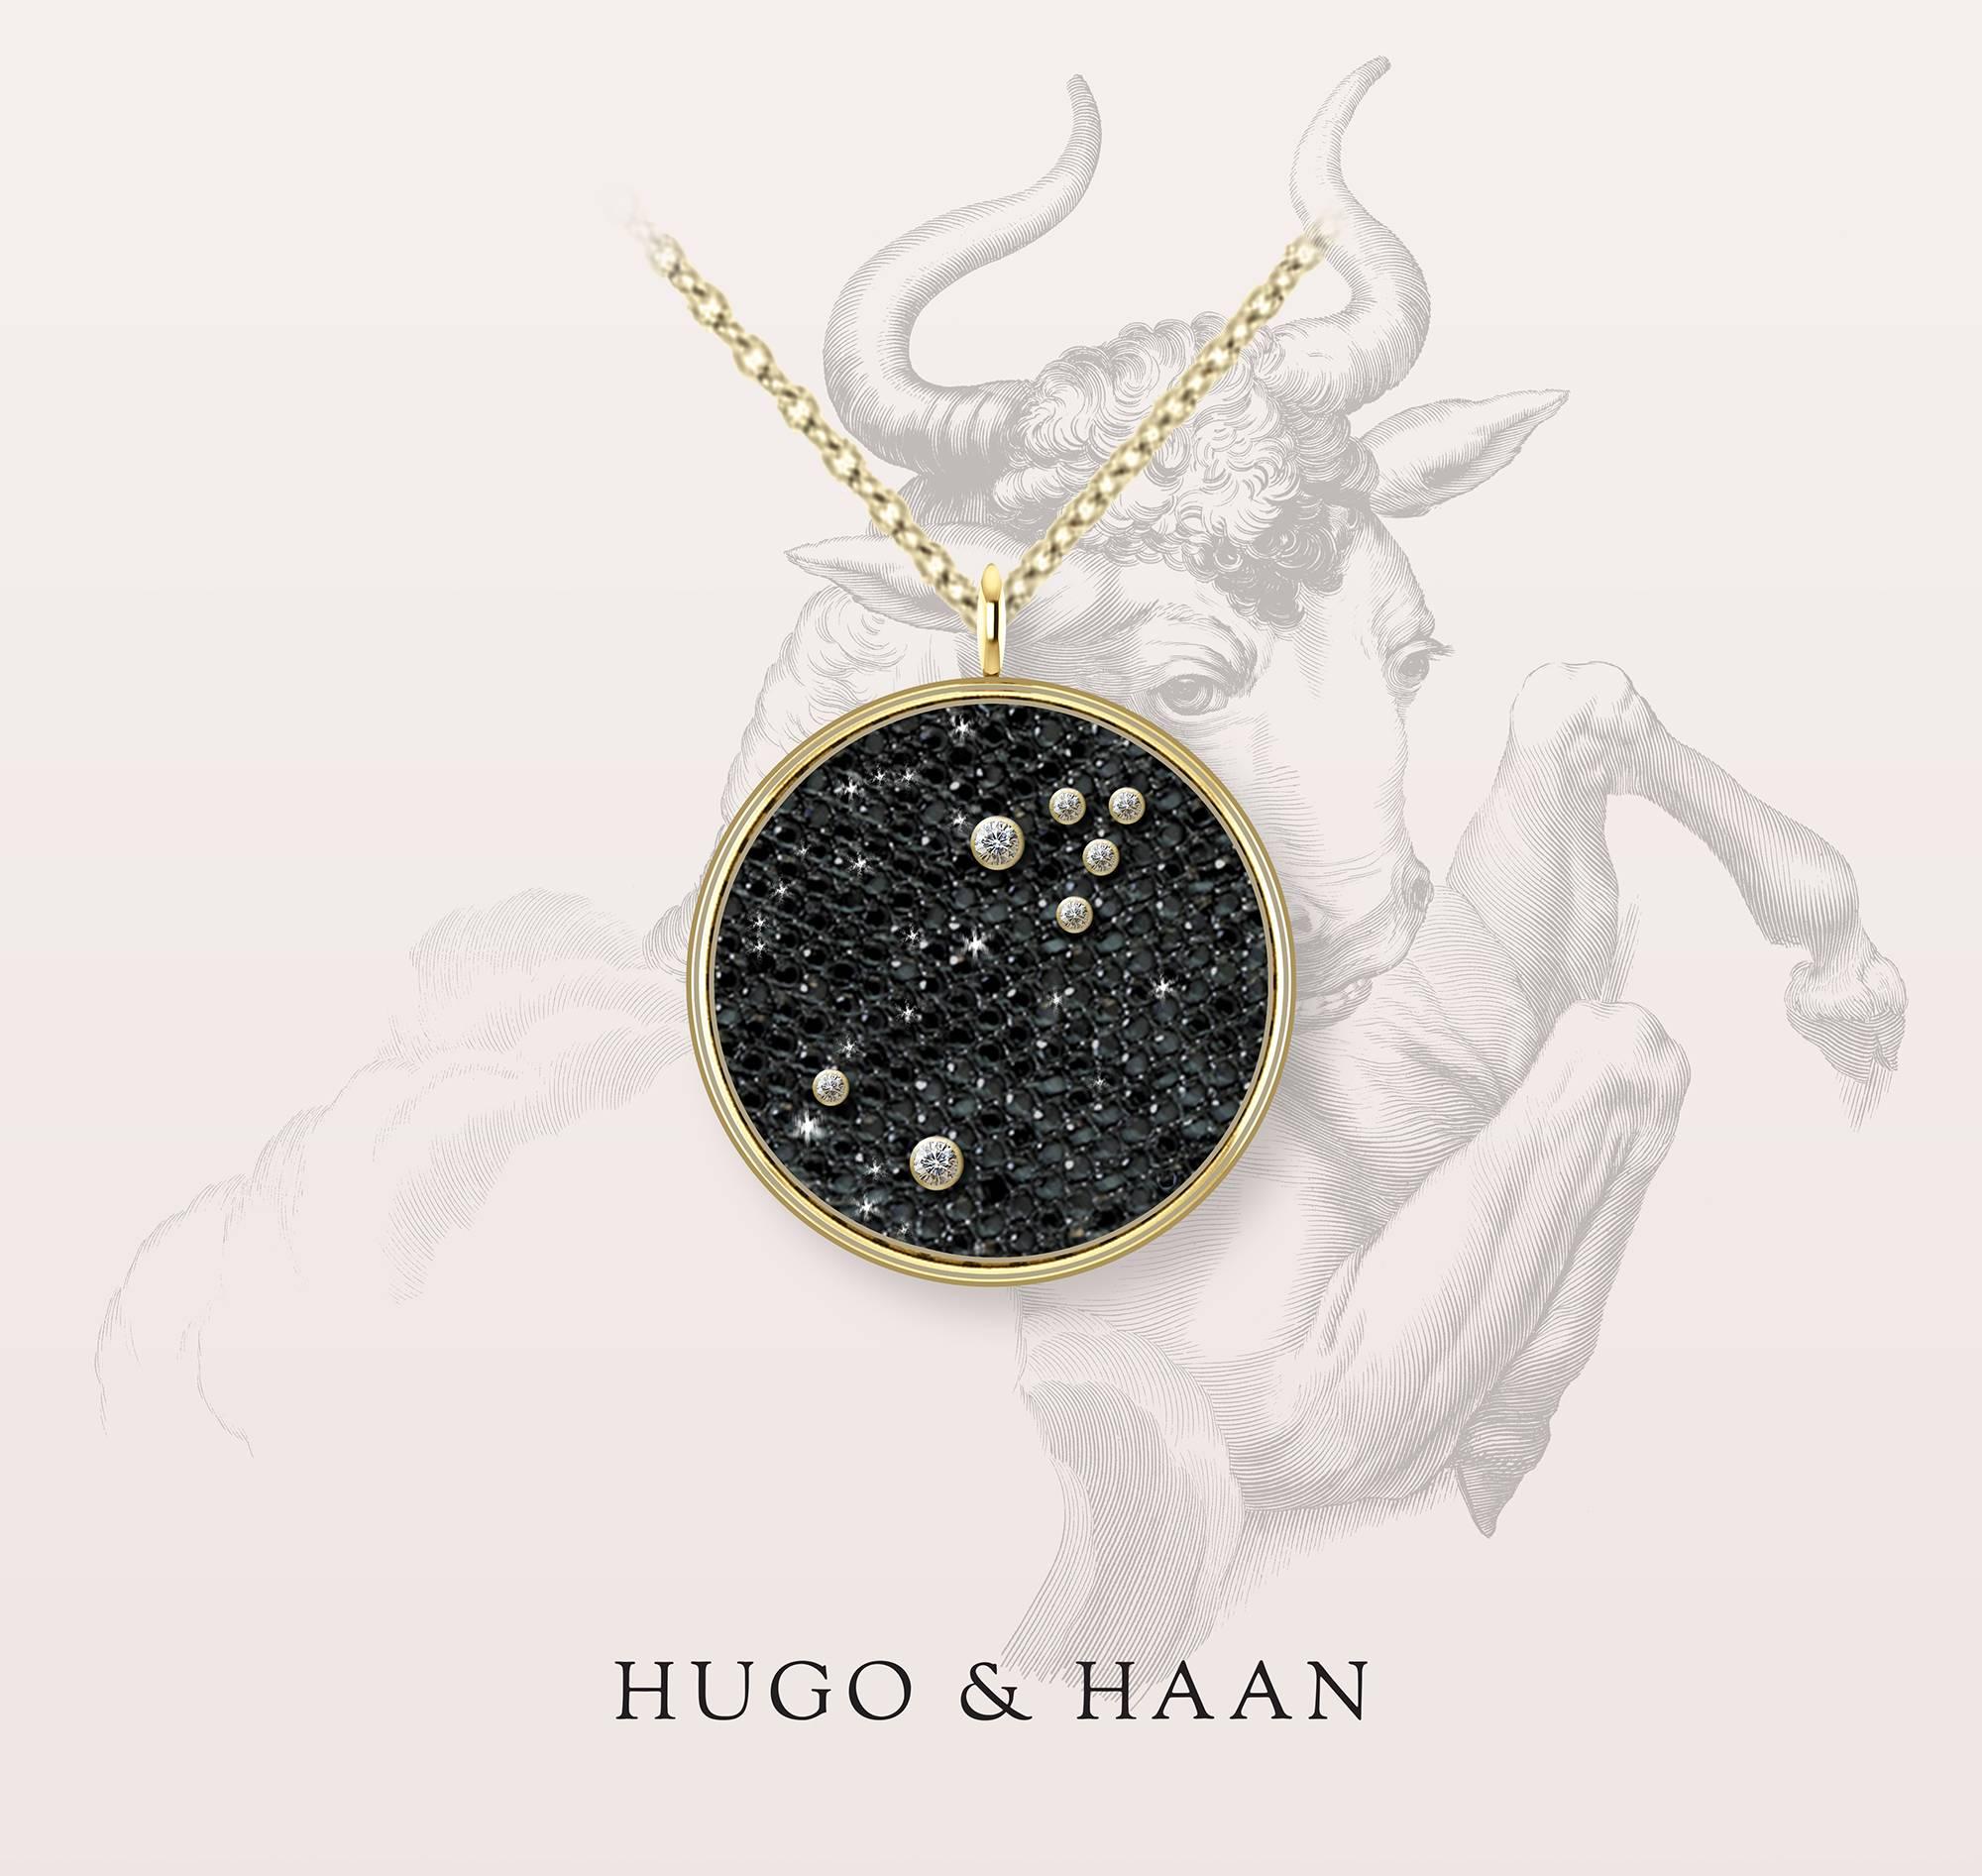 Details:

Material : 18k Yellow Gold
Principle Gemstone : Brilliant Cut White Diamonds
Other Gemstone : Black Diamond Pave
Customizable: Yes - we can create any star constellation

Options to customize: 

Metals available : Platinum /18kt Yellow